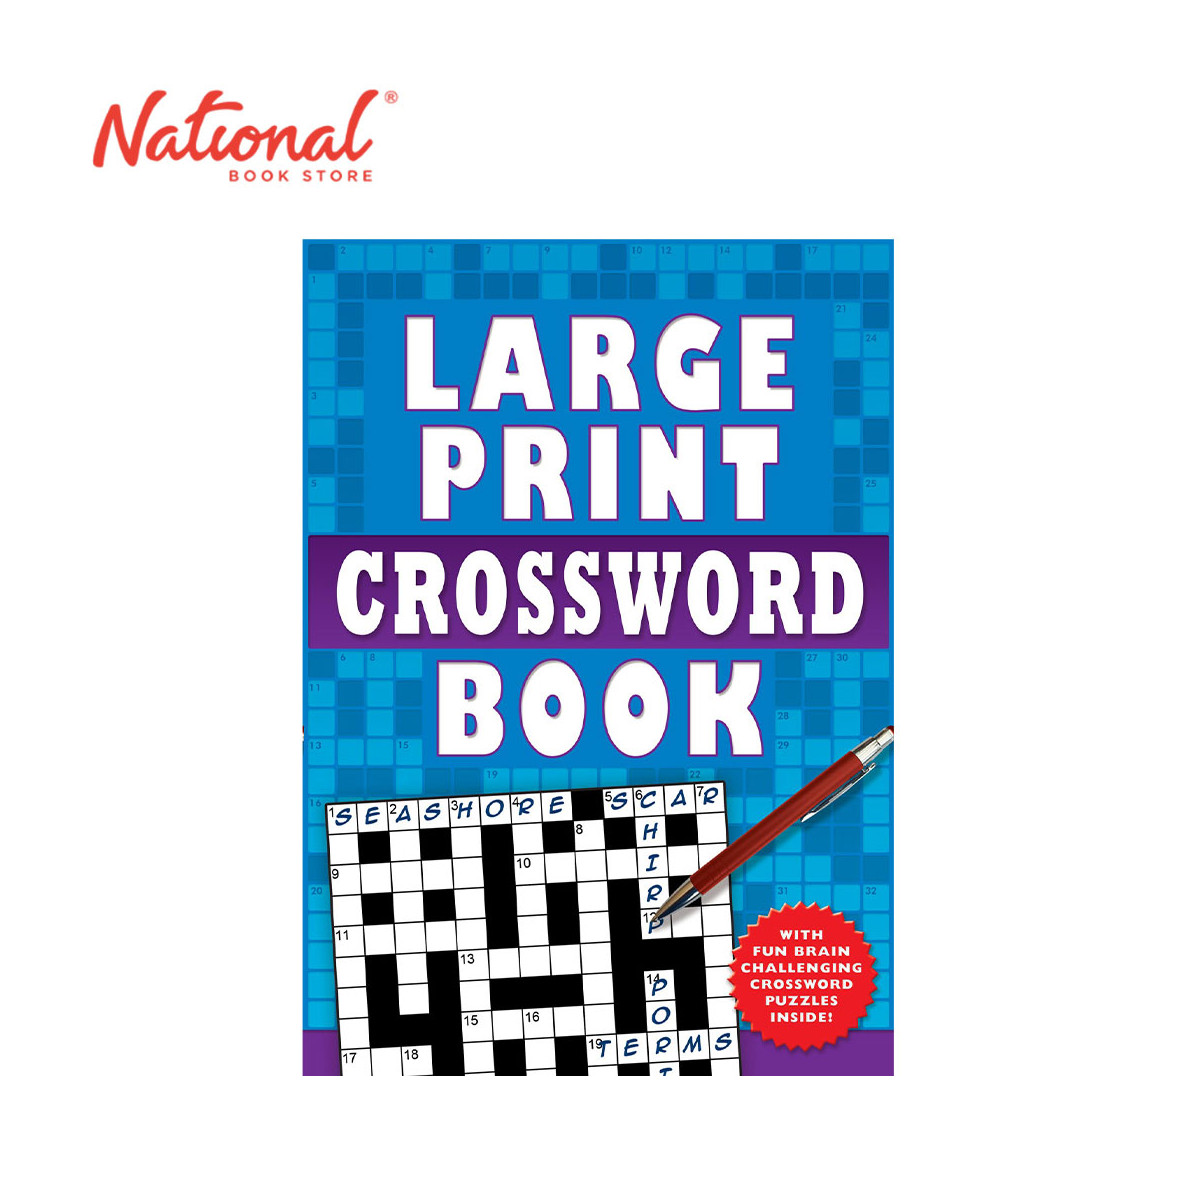 Large Print Crossword Book 1 to 2 - Trade Paperback - Puzzle Games